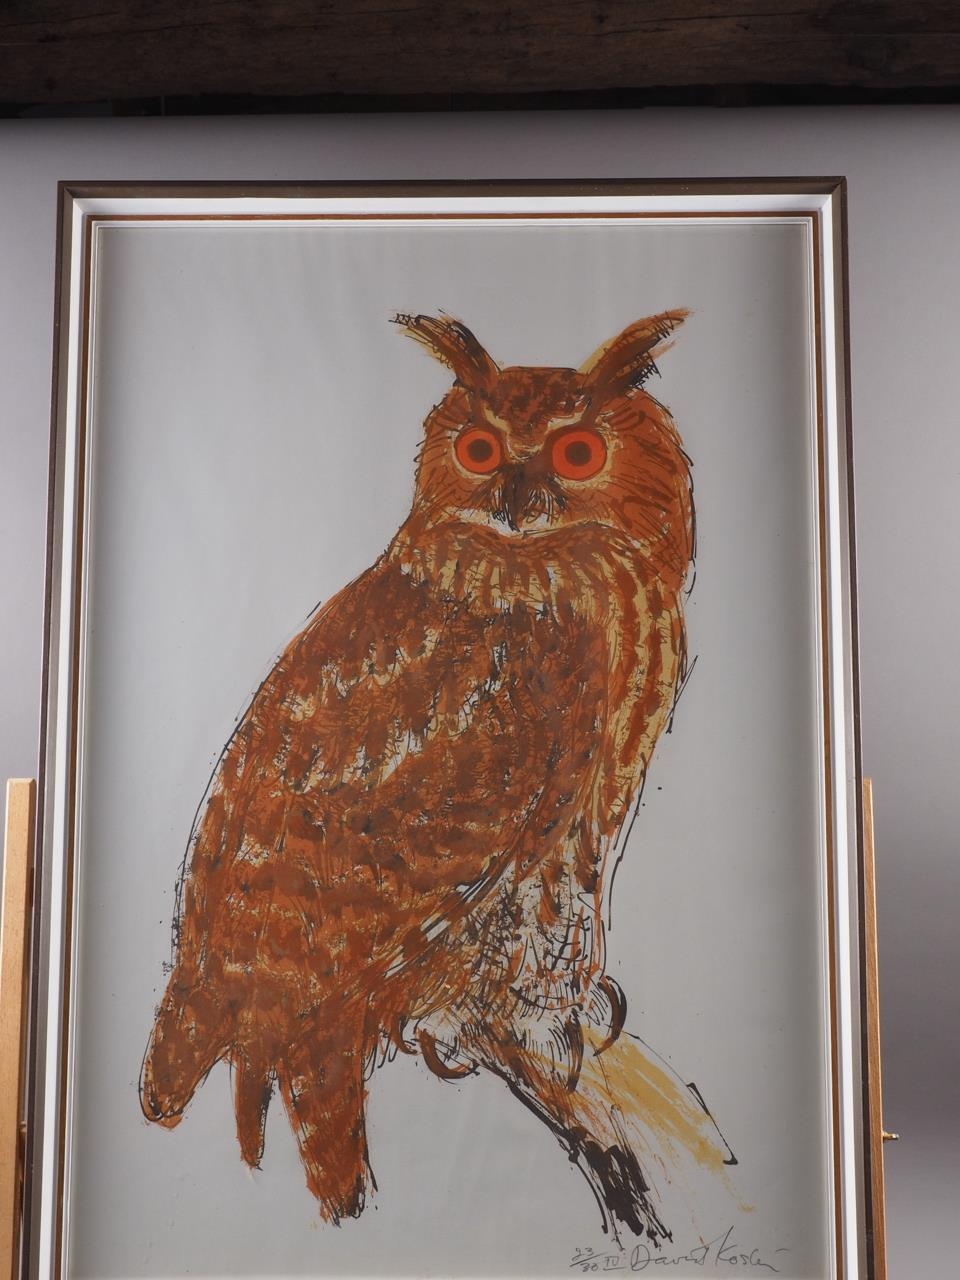 David Koster: a signed limited edition screen print, eagle owl, 23/30 IV, in strip frame